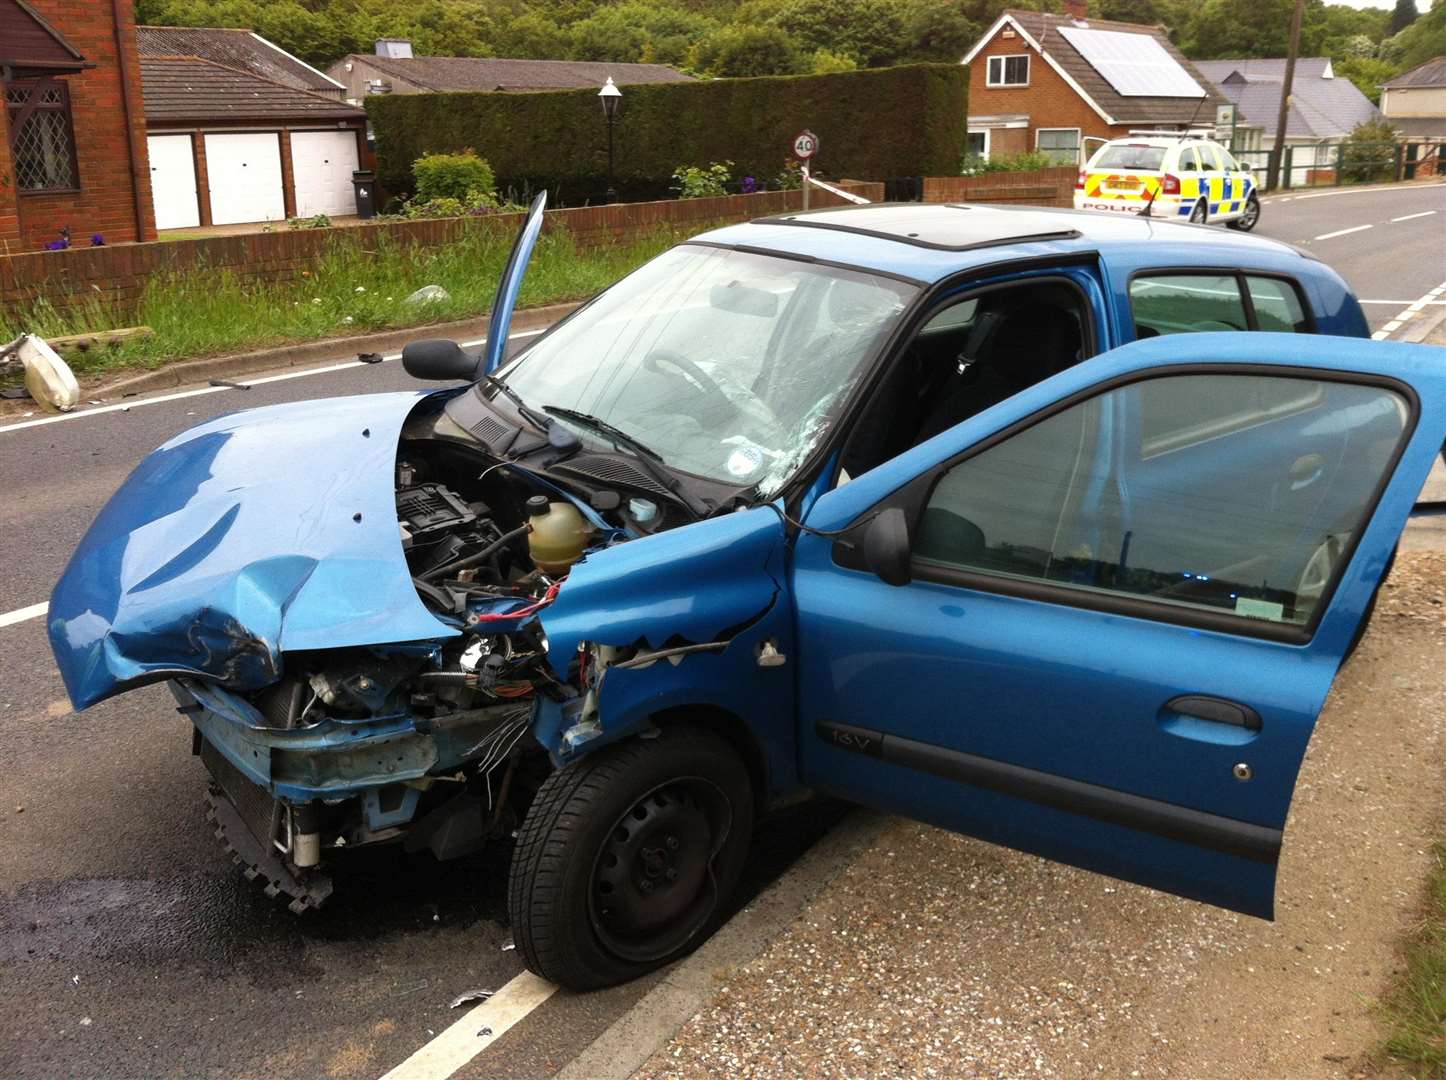 A car crashed into a telegraph pole on the A290 road between Whitstable and Canterbury